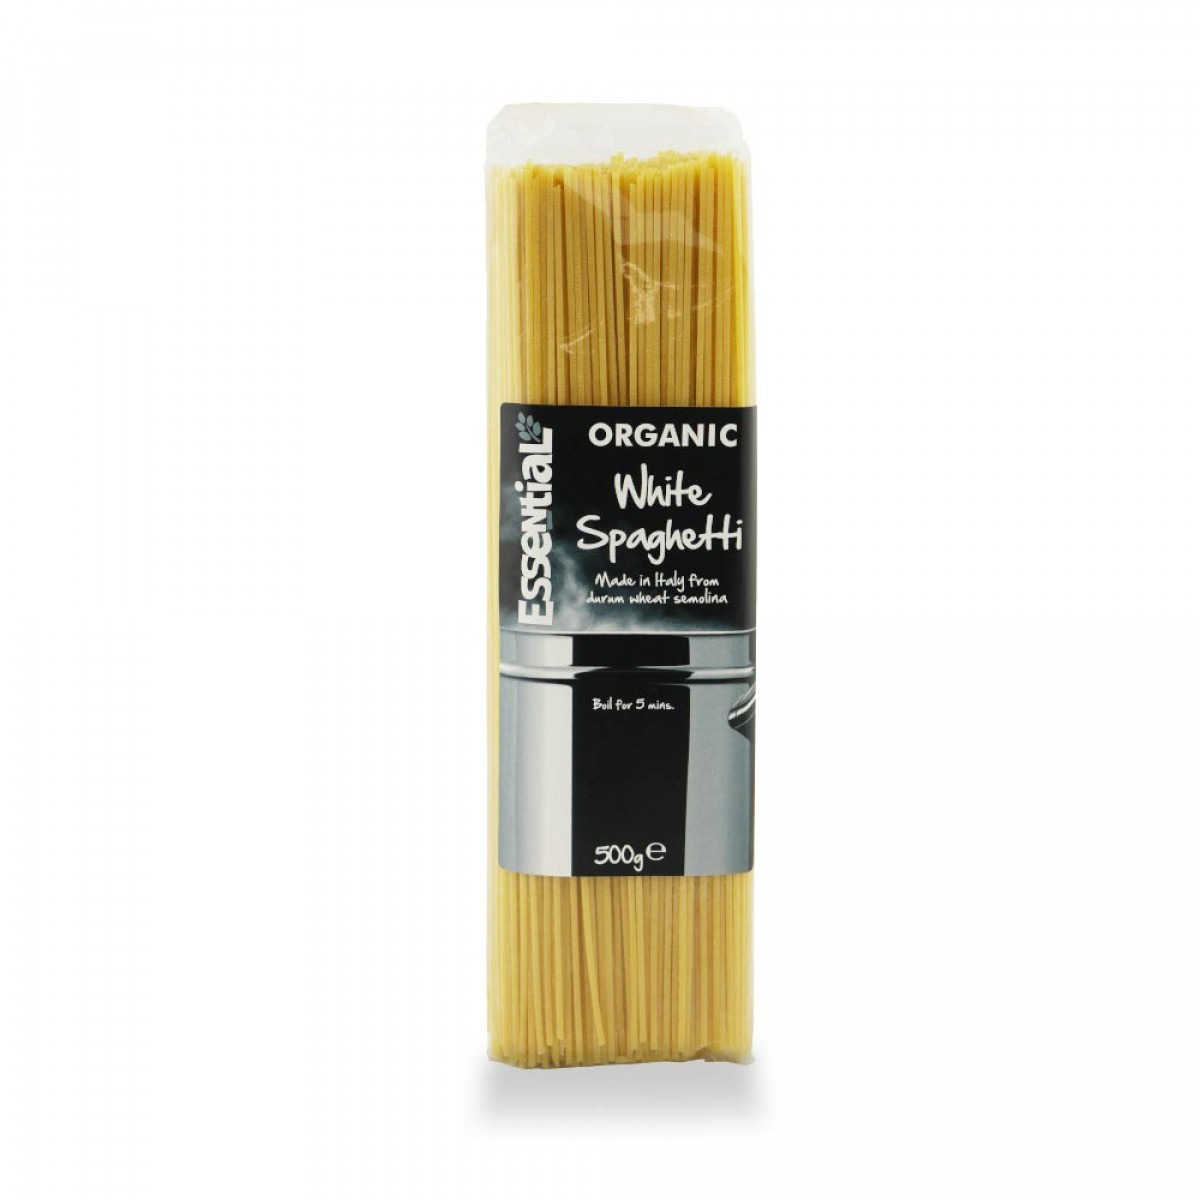 Product picture for White Spaghetti